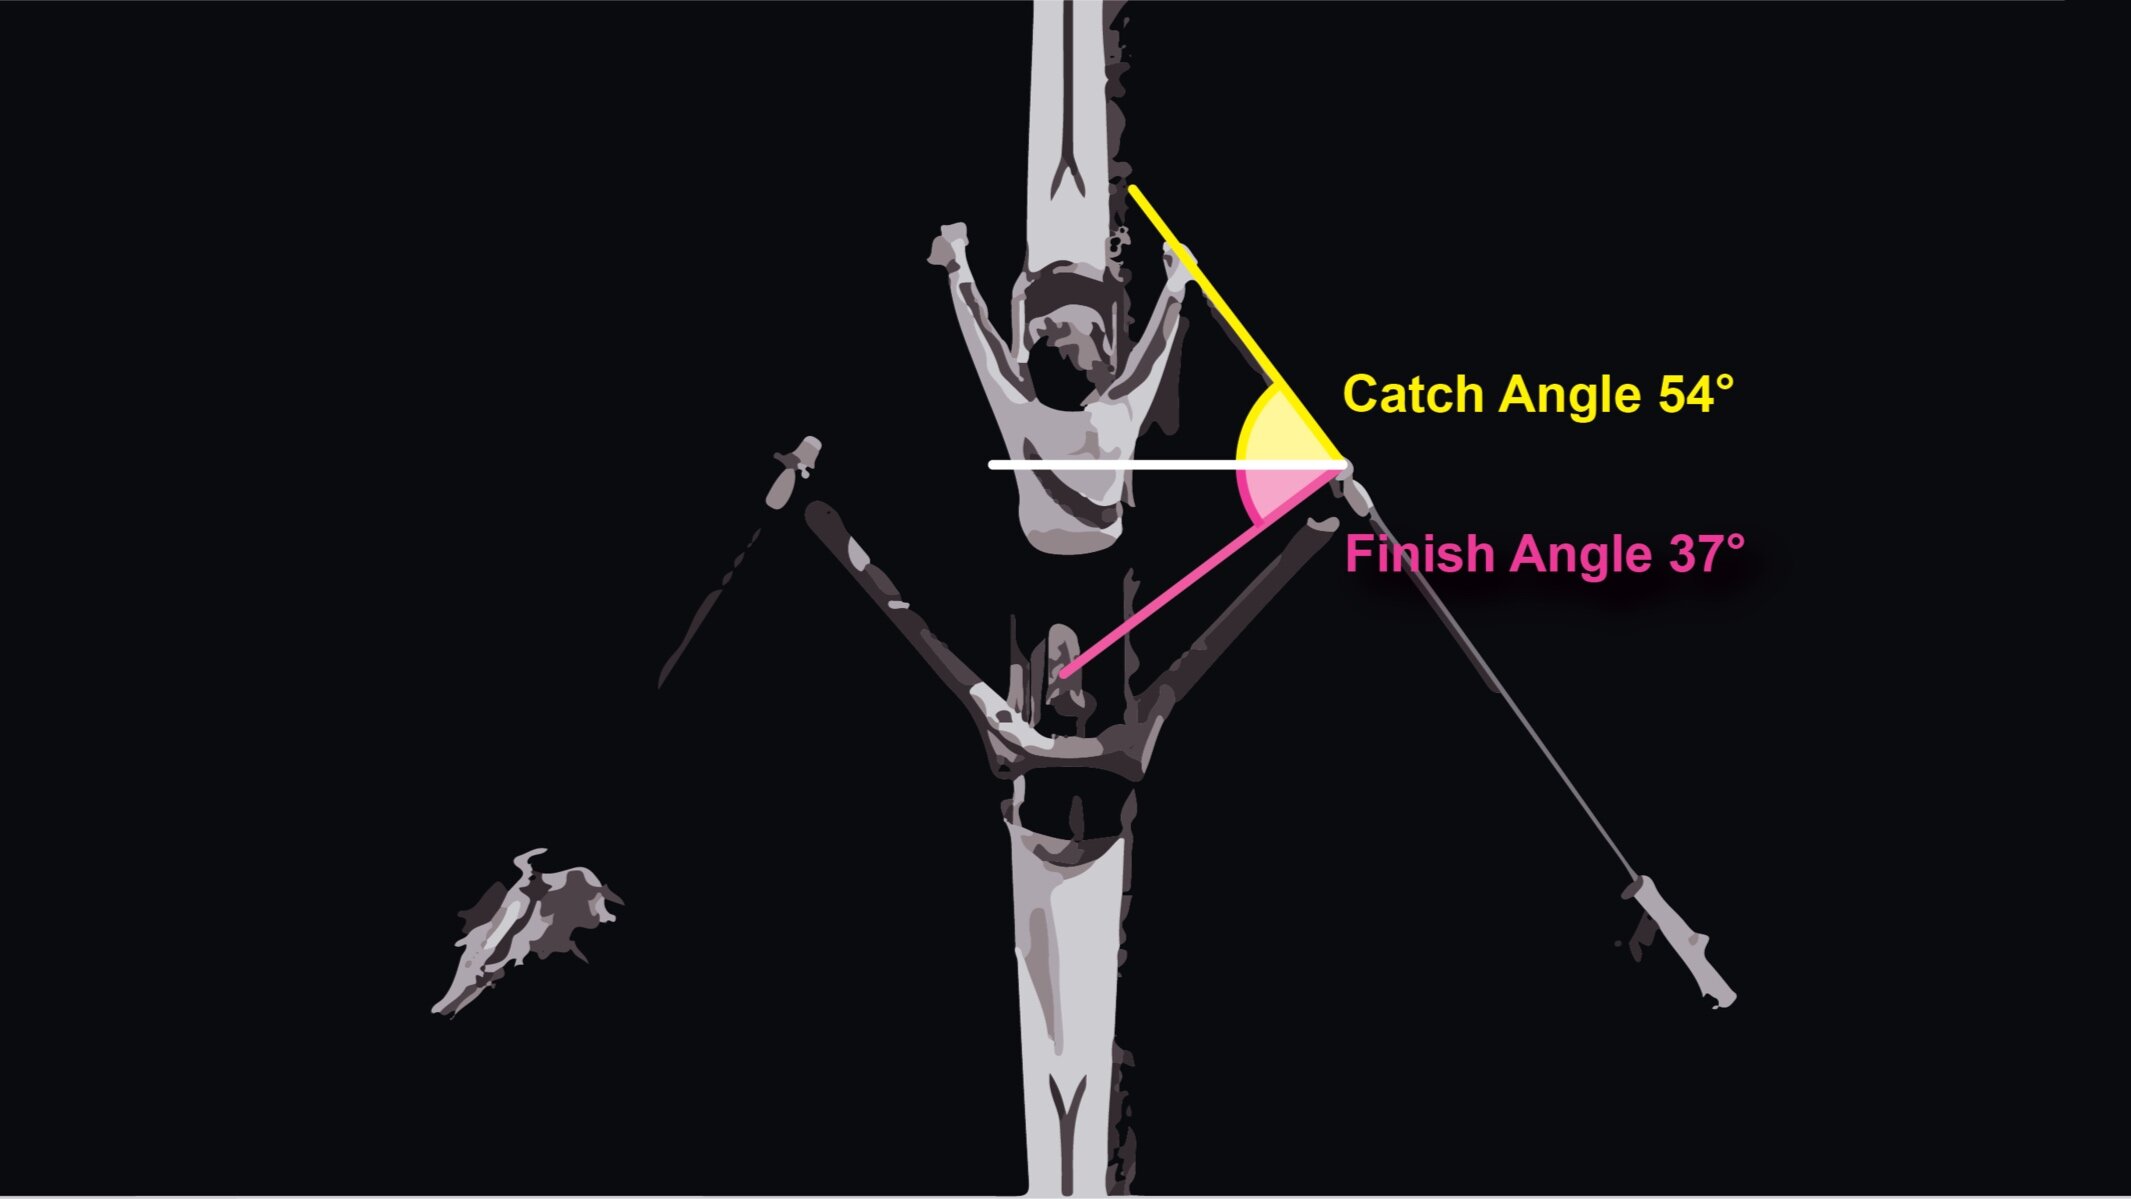 Catch and Finish Angles, Why and How to Set Them